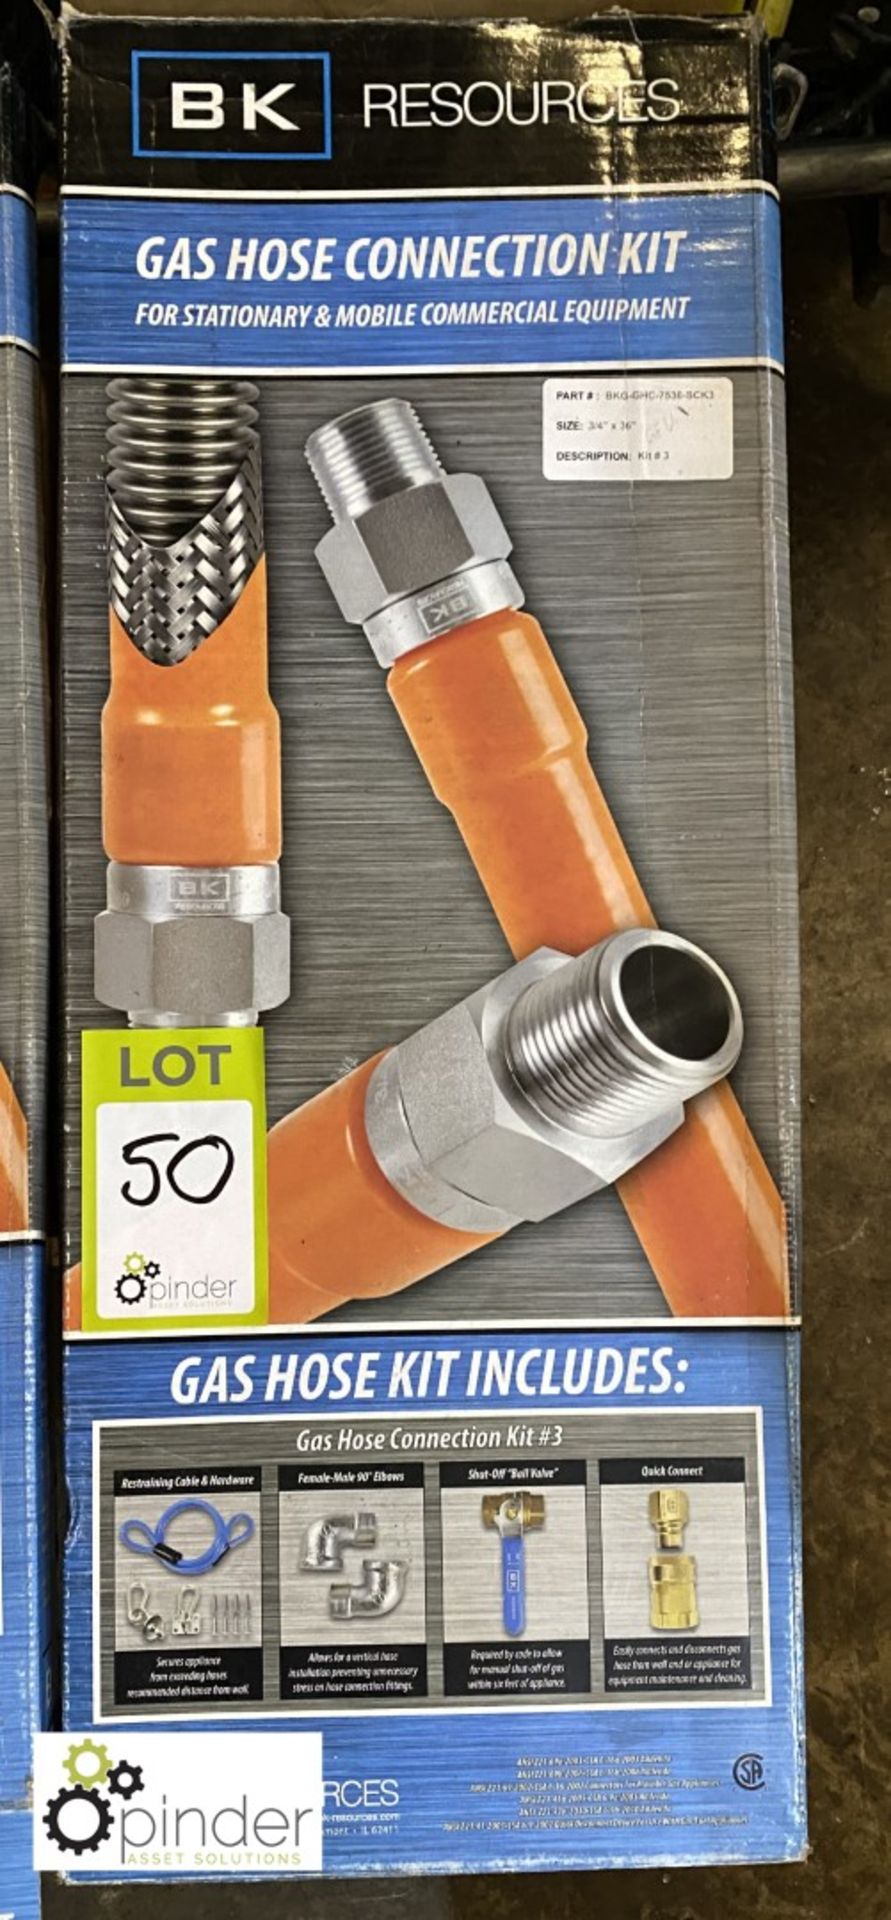 BK Resources gas hose Connection Kit, ¾in x 36in, boxed and unused